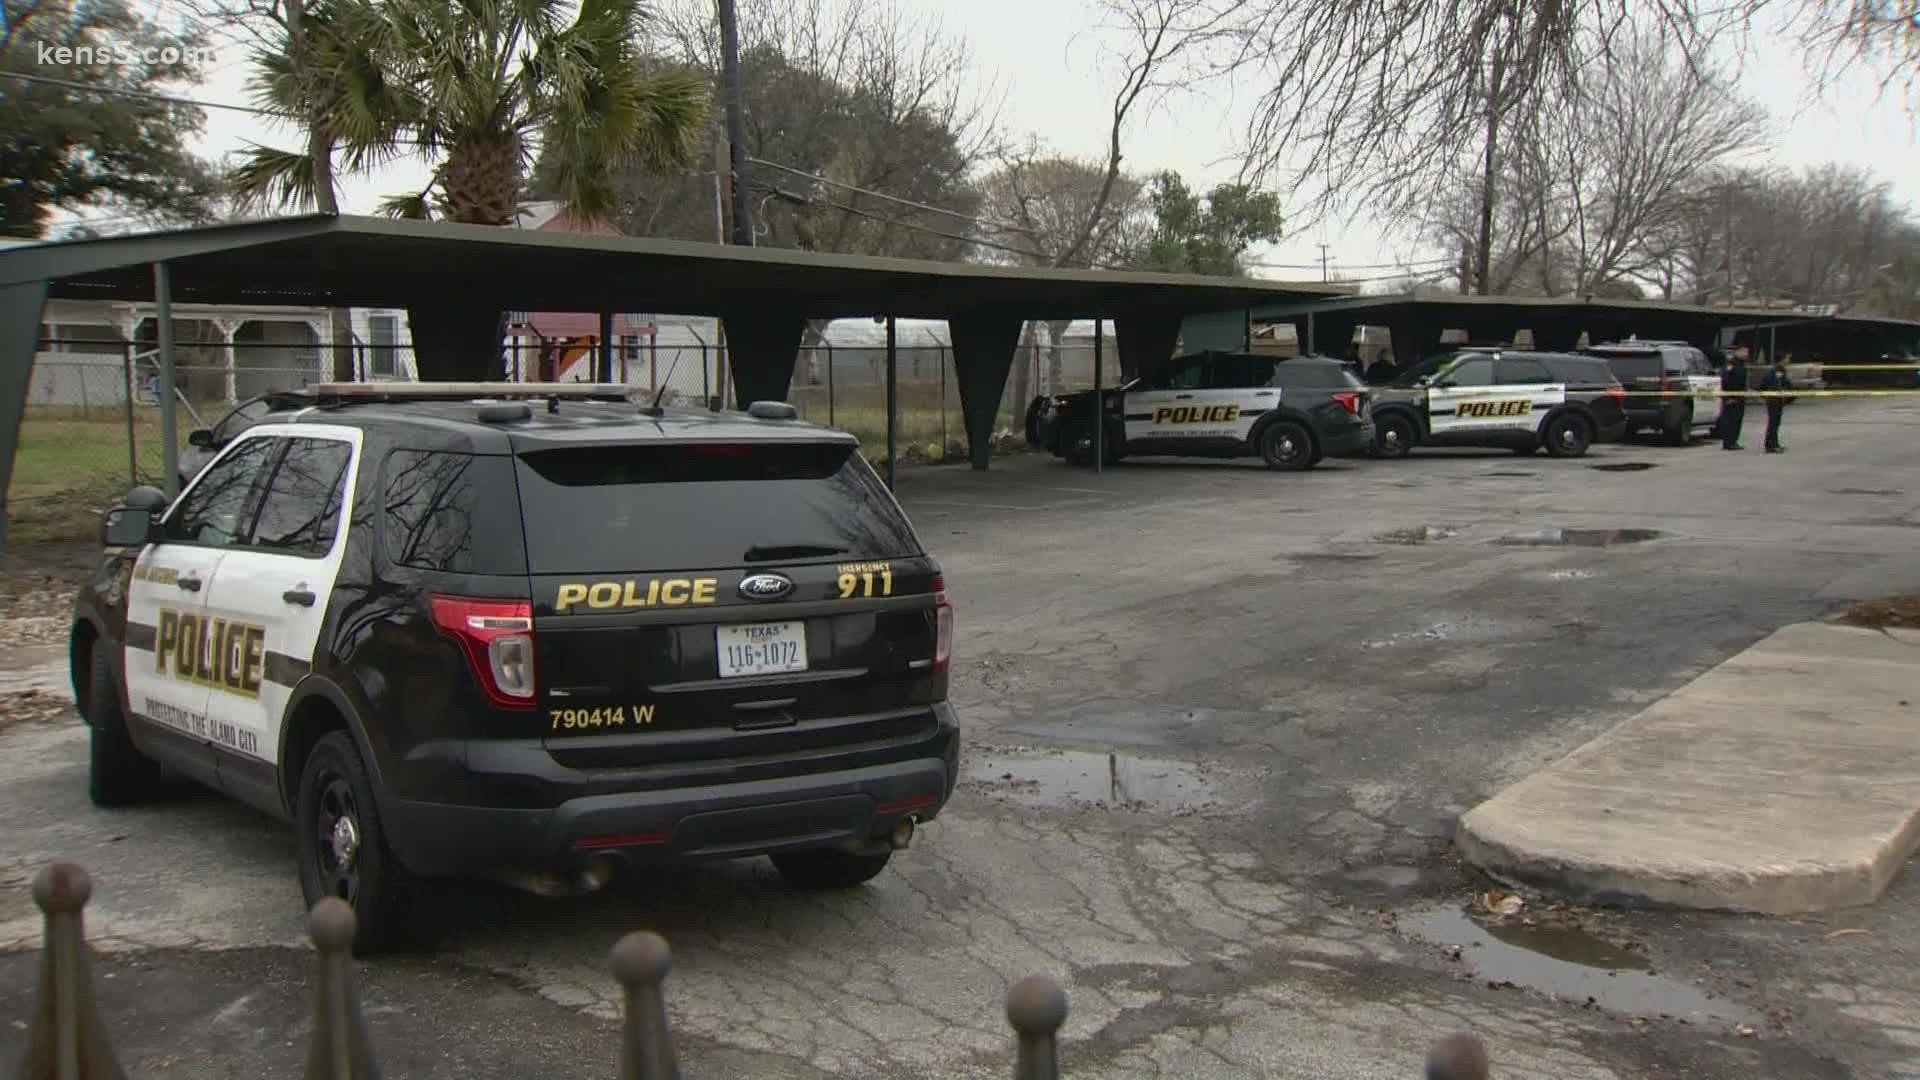 A person saw what appeared to be a body lying in a parking space at an apartment complex.